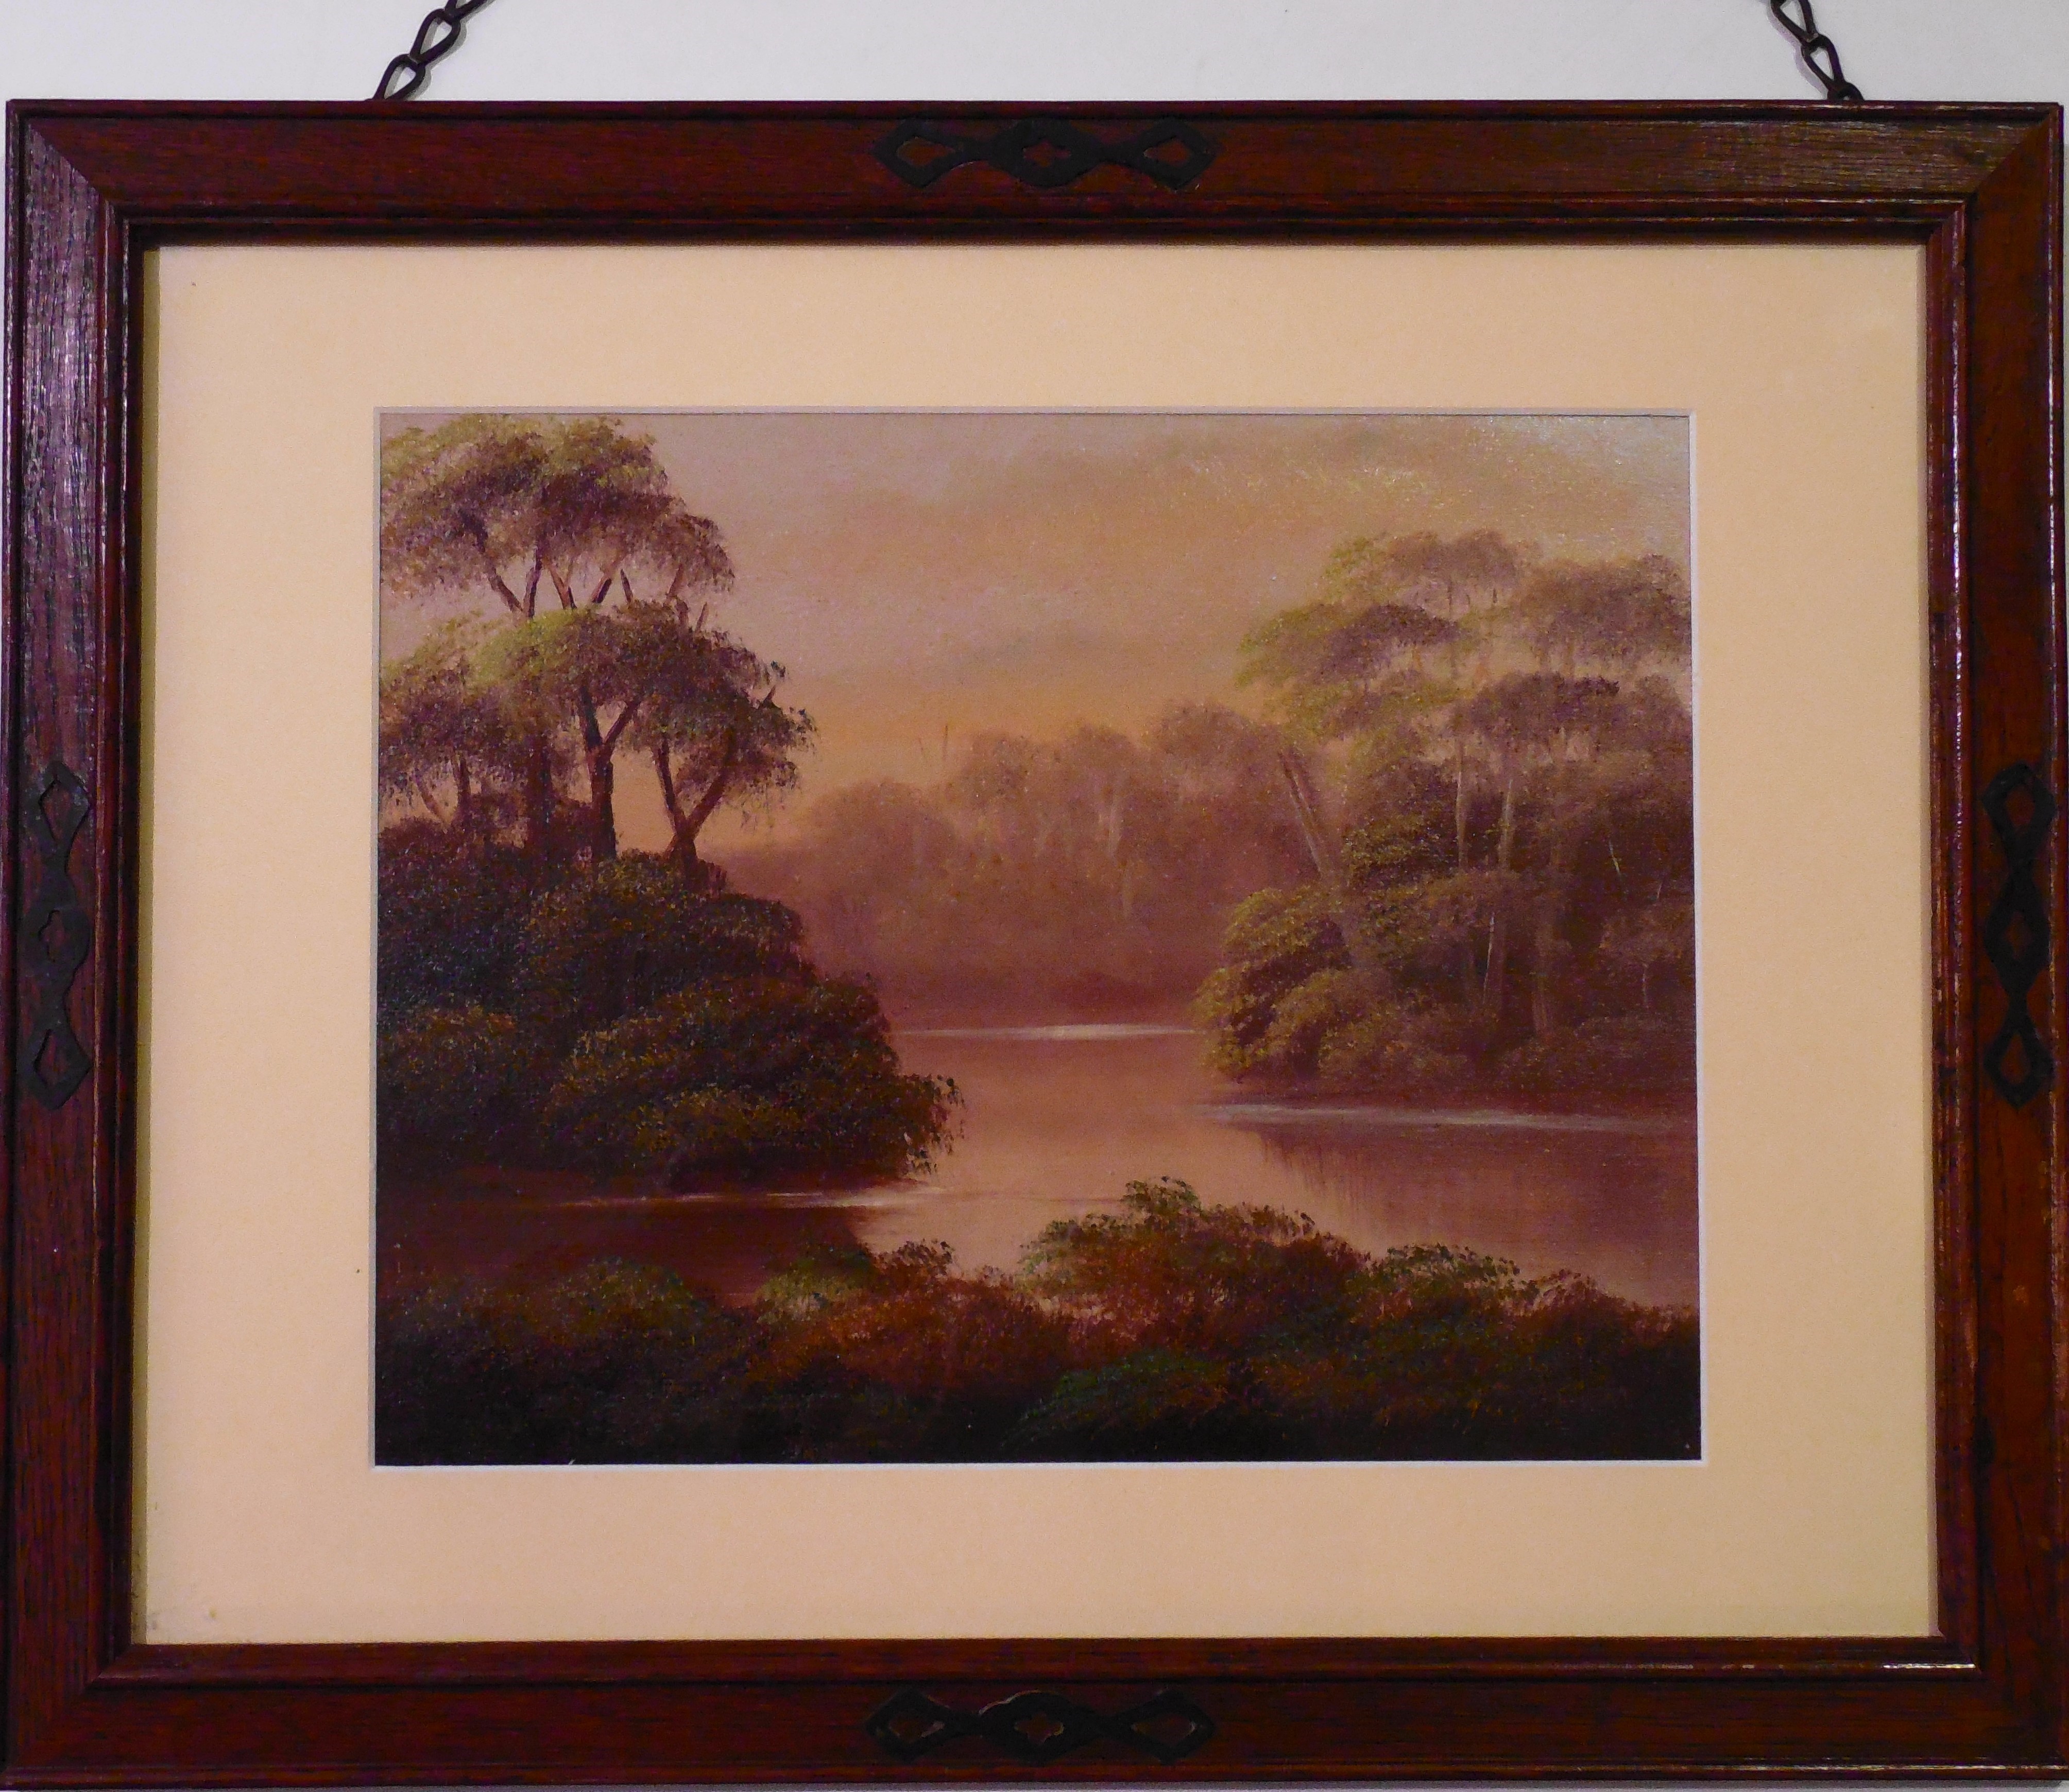 Historic Maria Sanchez Creek of St. Augustine by Martin Johnson Heade. This is the only known image of Maria Sanchez that Heade painted. He would have seen this view daily south of his work place.